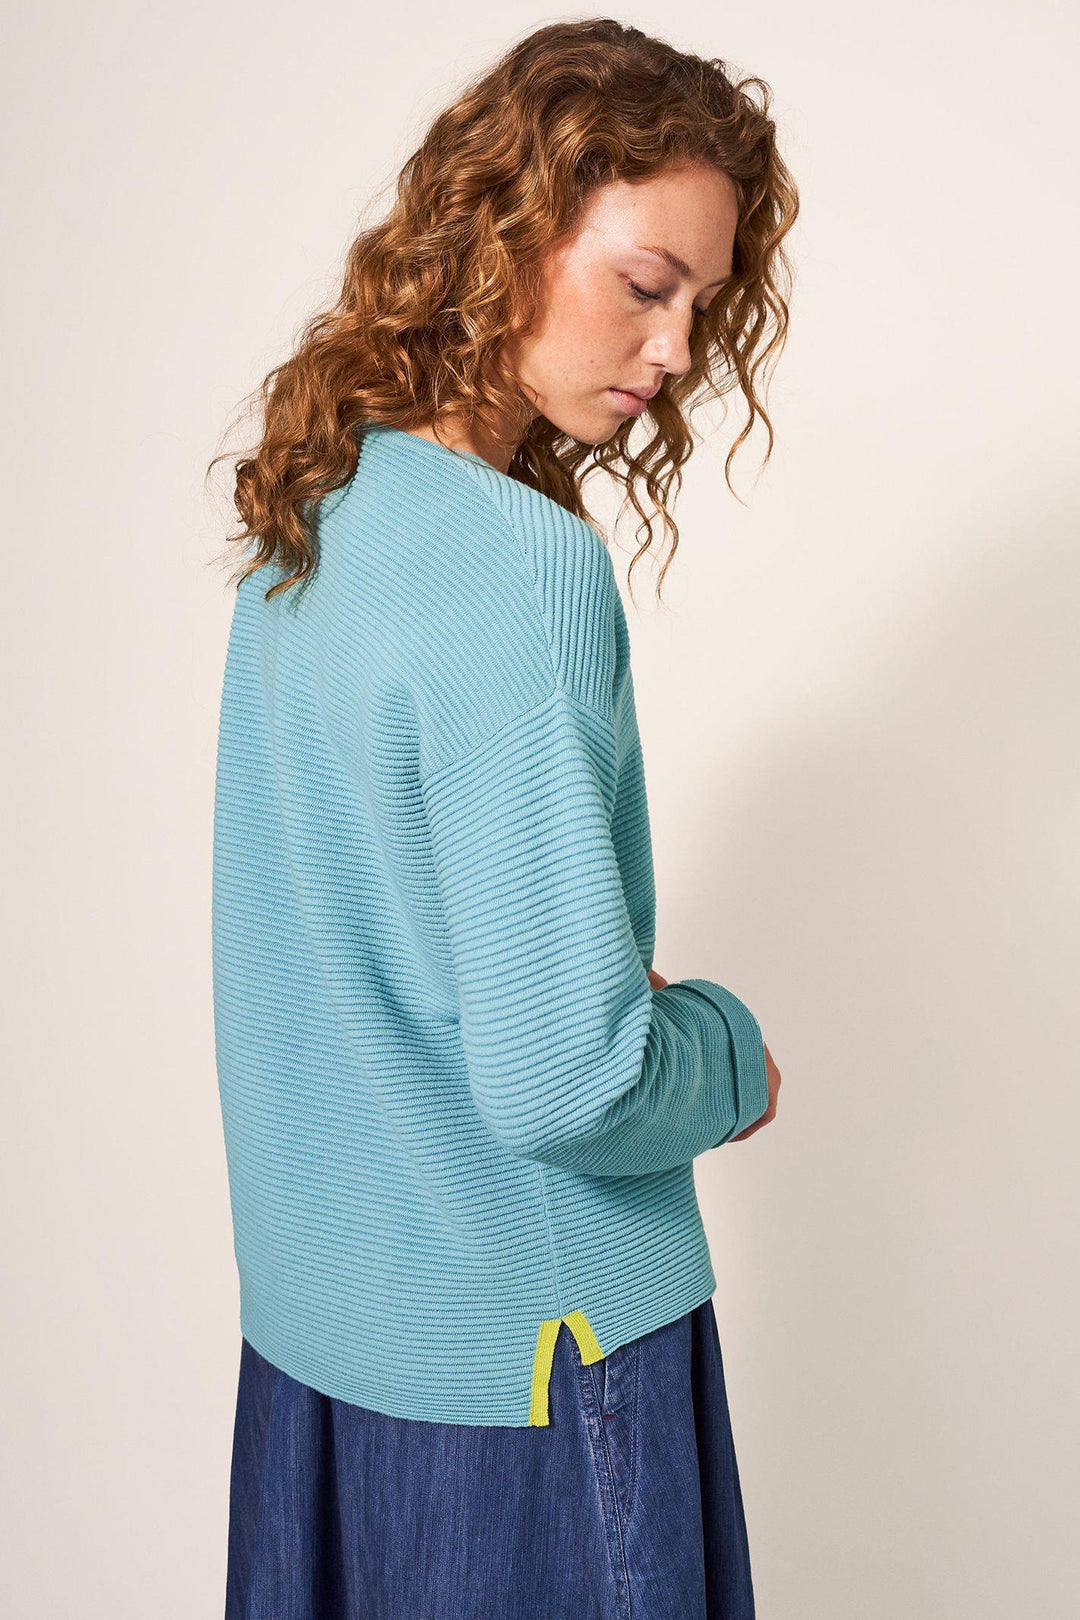 White Stuff 439249 Jana Mid Teal Blue Relaxed Shoulder Ribbed Jumper  - Shirley Allum Boutique